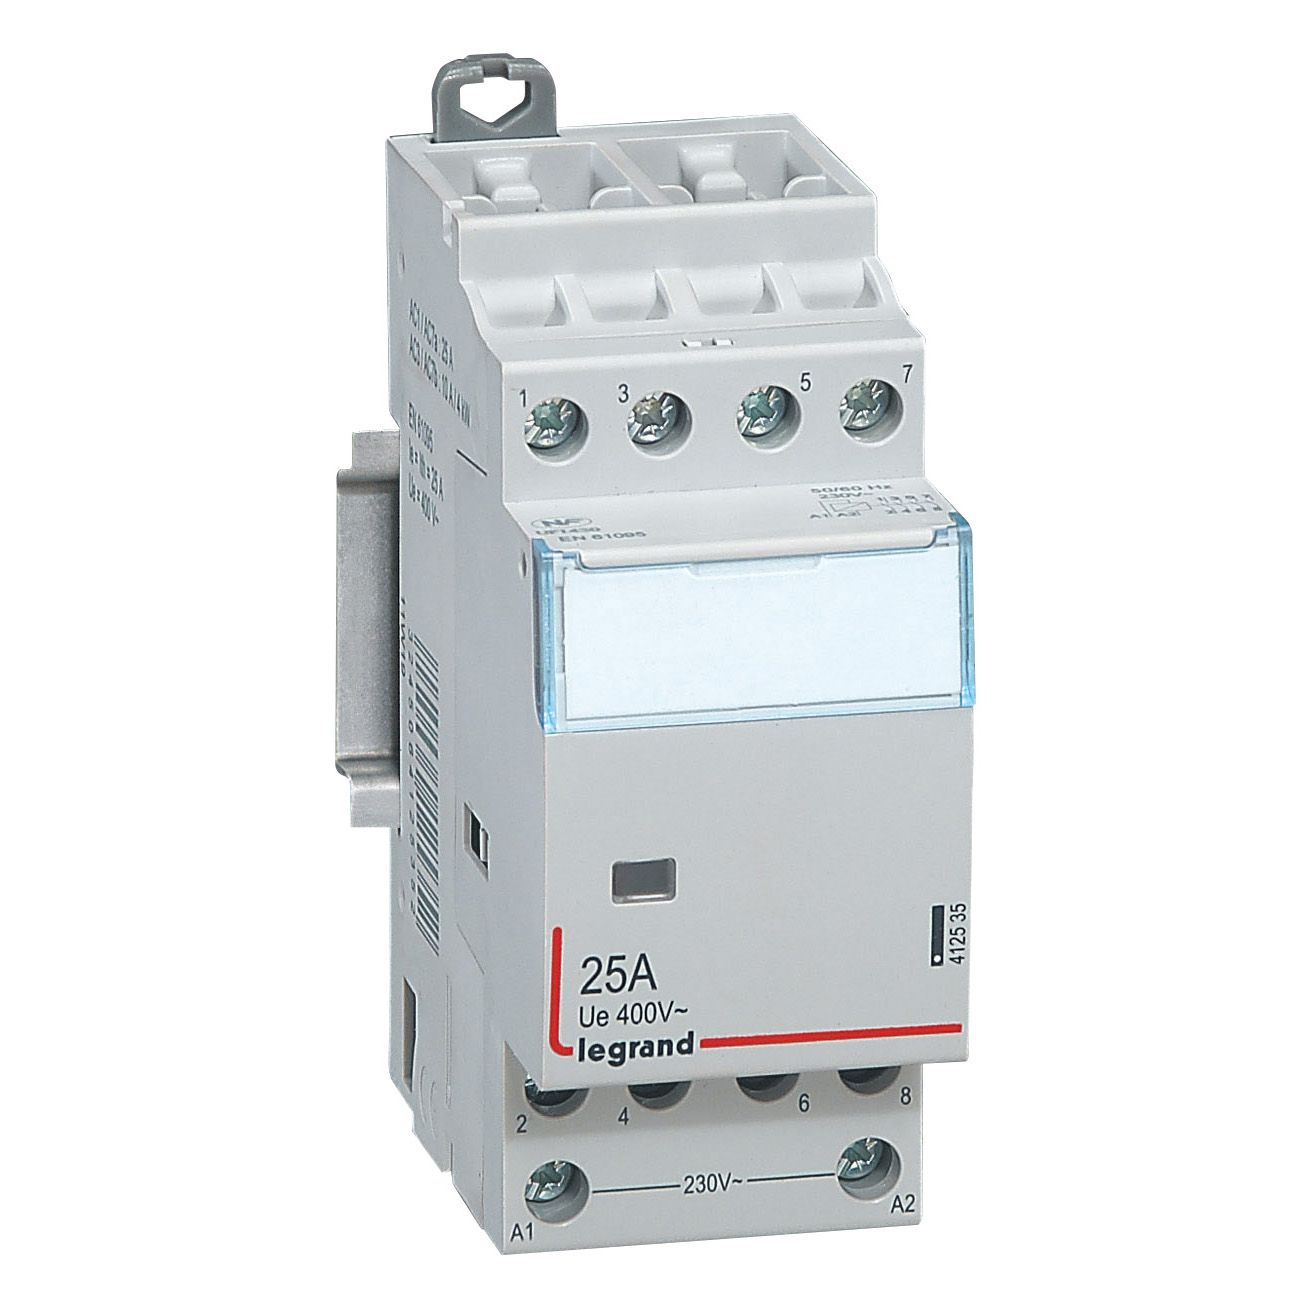 Power contactor CX? - with 230 V~ coll - 4P - 400 V~ - 25 A - 4 N/O